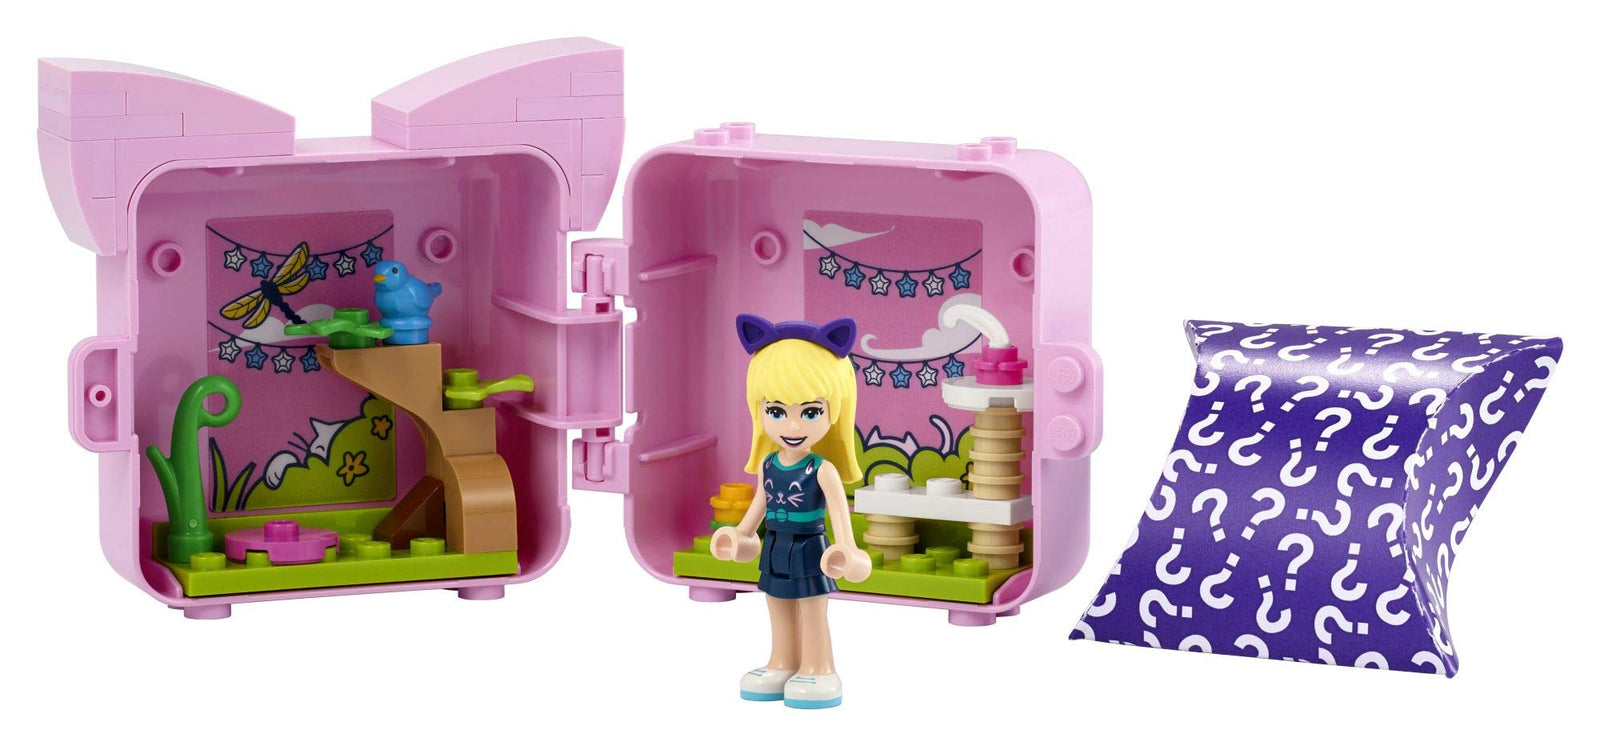 LEGO Friends Stephanie’s Cat Cube 41665 Building Kit; Kitten Toy for Kids with a Stephanie Mini-Doll Toy; Cat Toy Makes a Creative Gift for Kids Who Love Portable Playsets, New 2021 (46 Pieces)